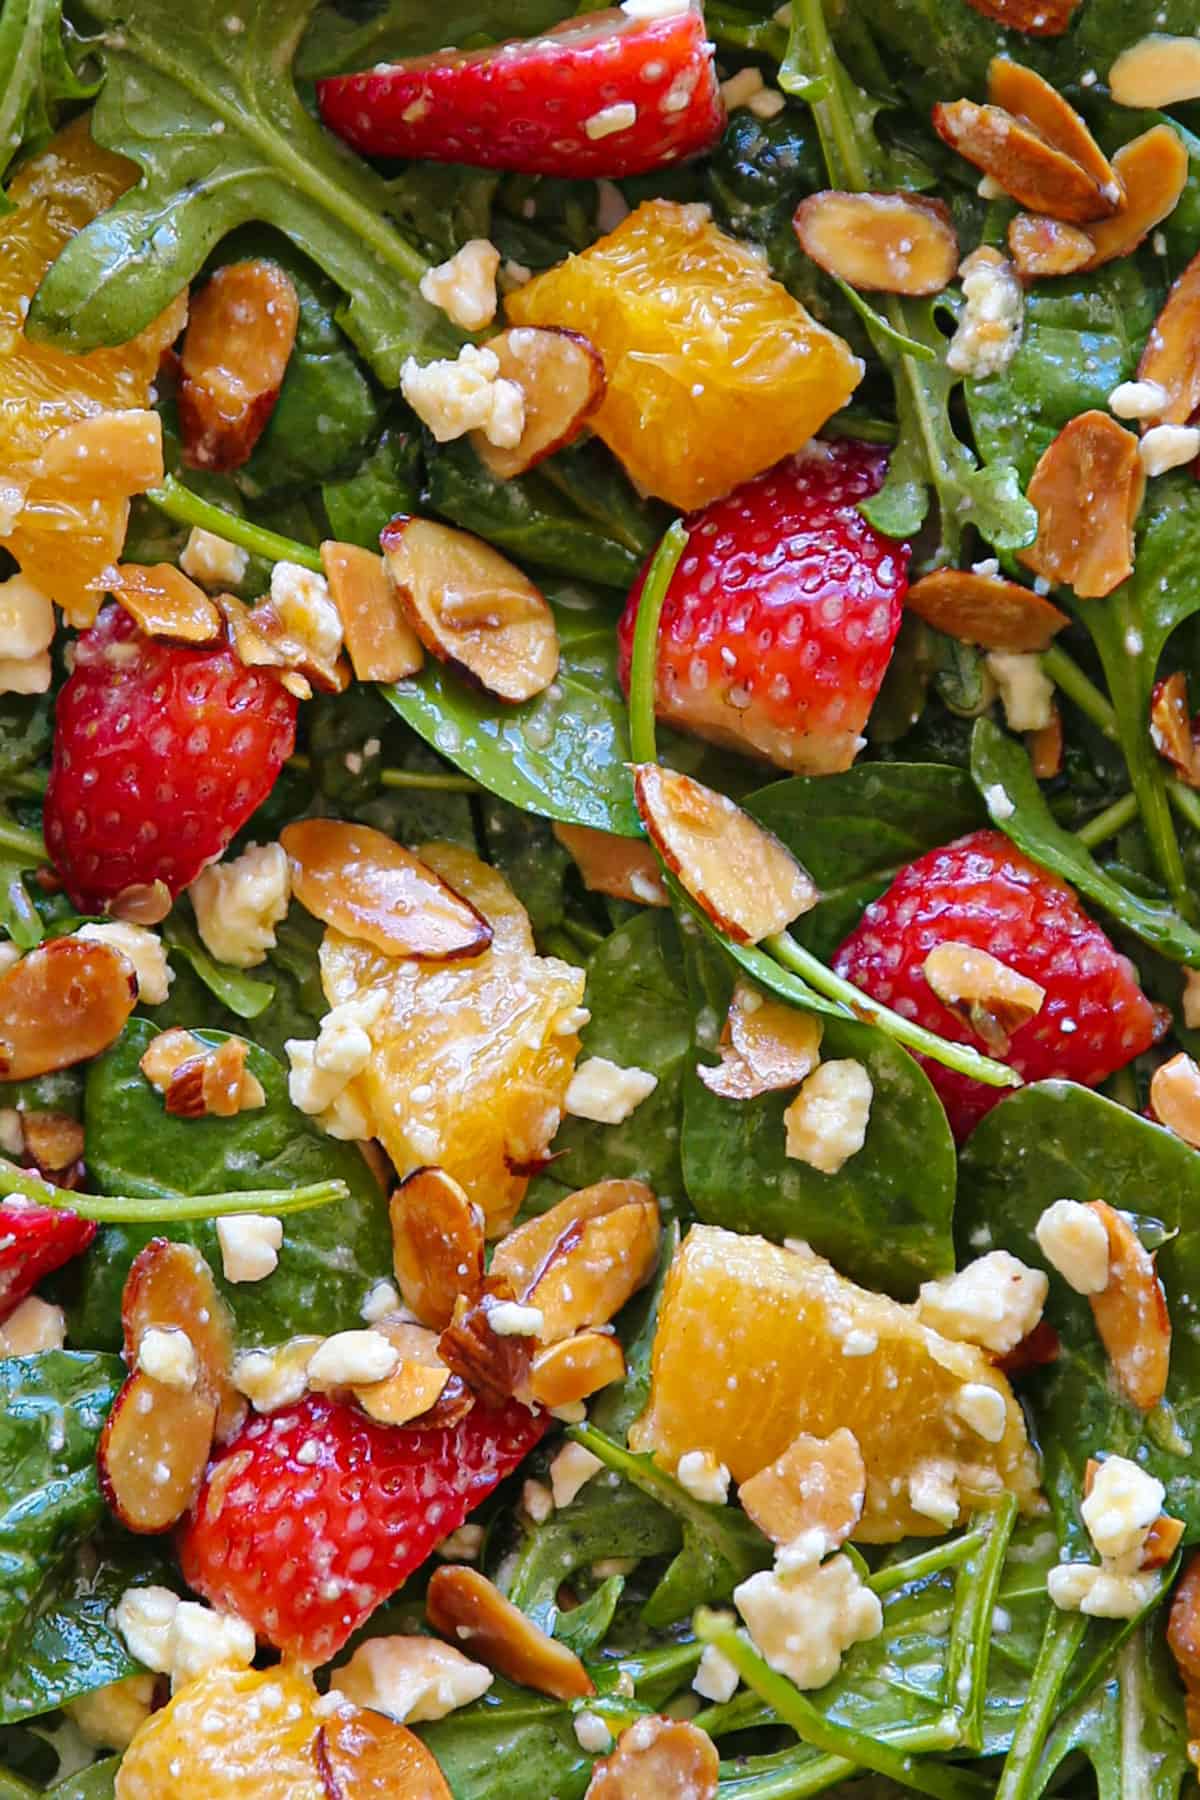 Strawberry Orange Salad with Spinach, Arugula, Toasted Sliced Almonds, and Feta Cheese (close-up).